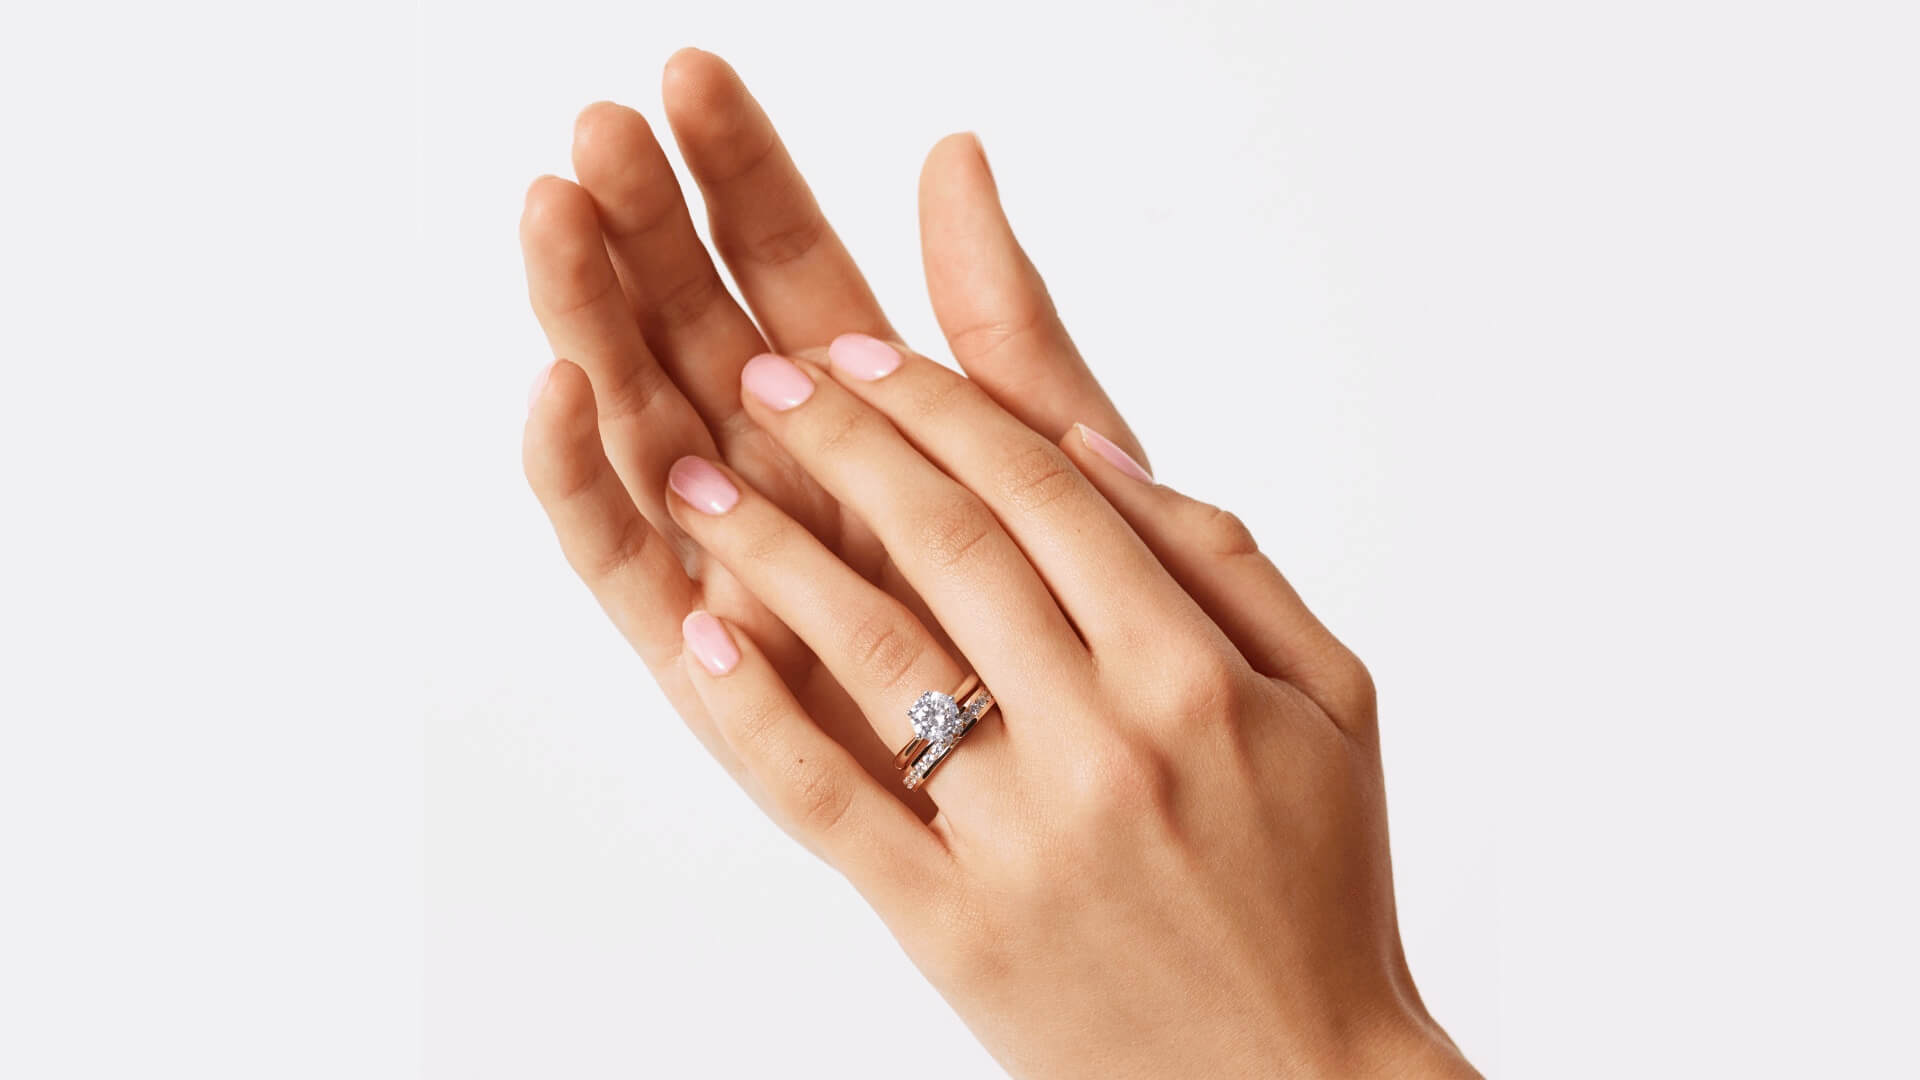 5 Things You Should Know Before Buying An Engagement Ring